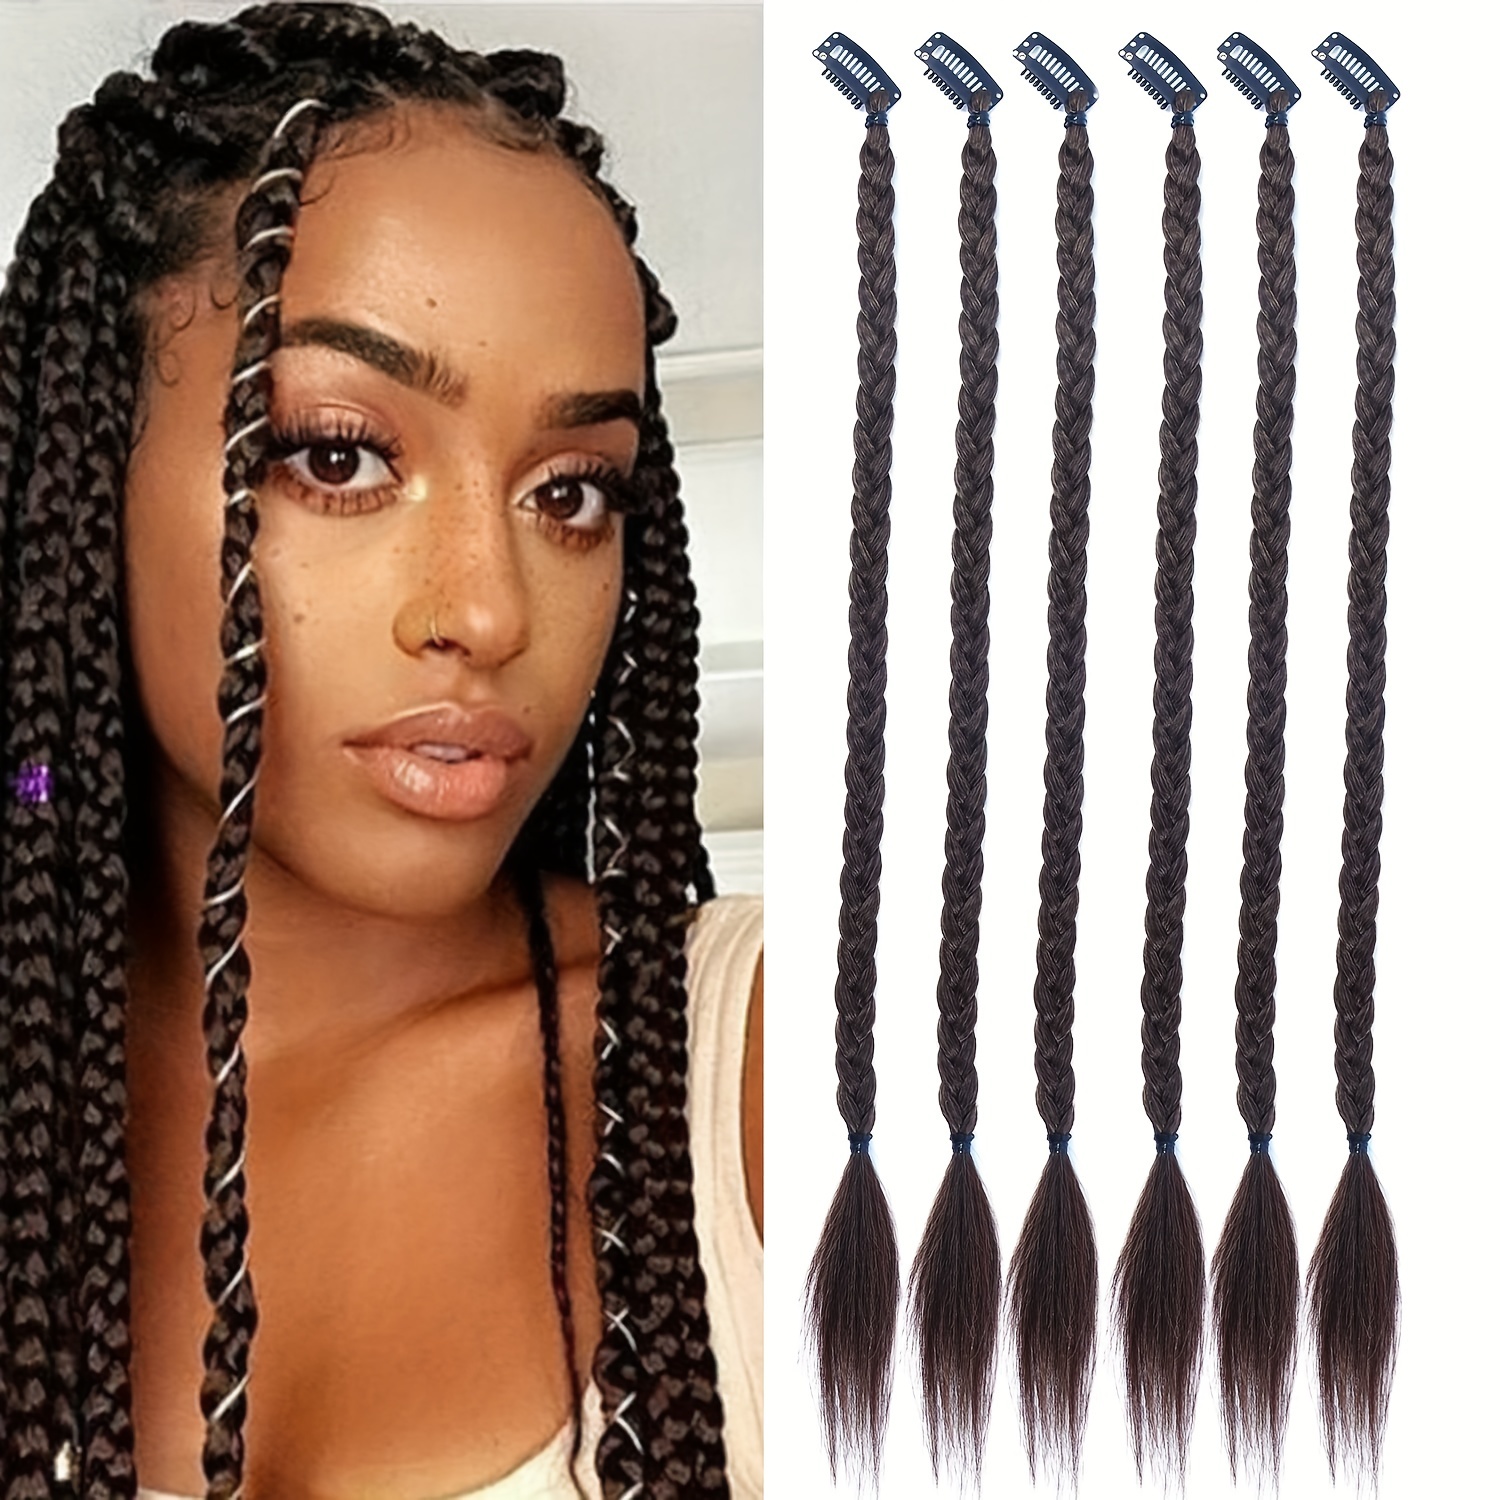  Braid Hair Extensions, 4 PCS Baby Braids Front Side Bang  Curtain Bang Clip in Hair Extensions Long Braided Hair Piece Natural Soft  Synthetic Hair for Women Daily Wear 20 Inch